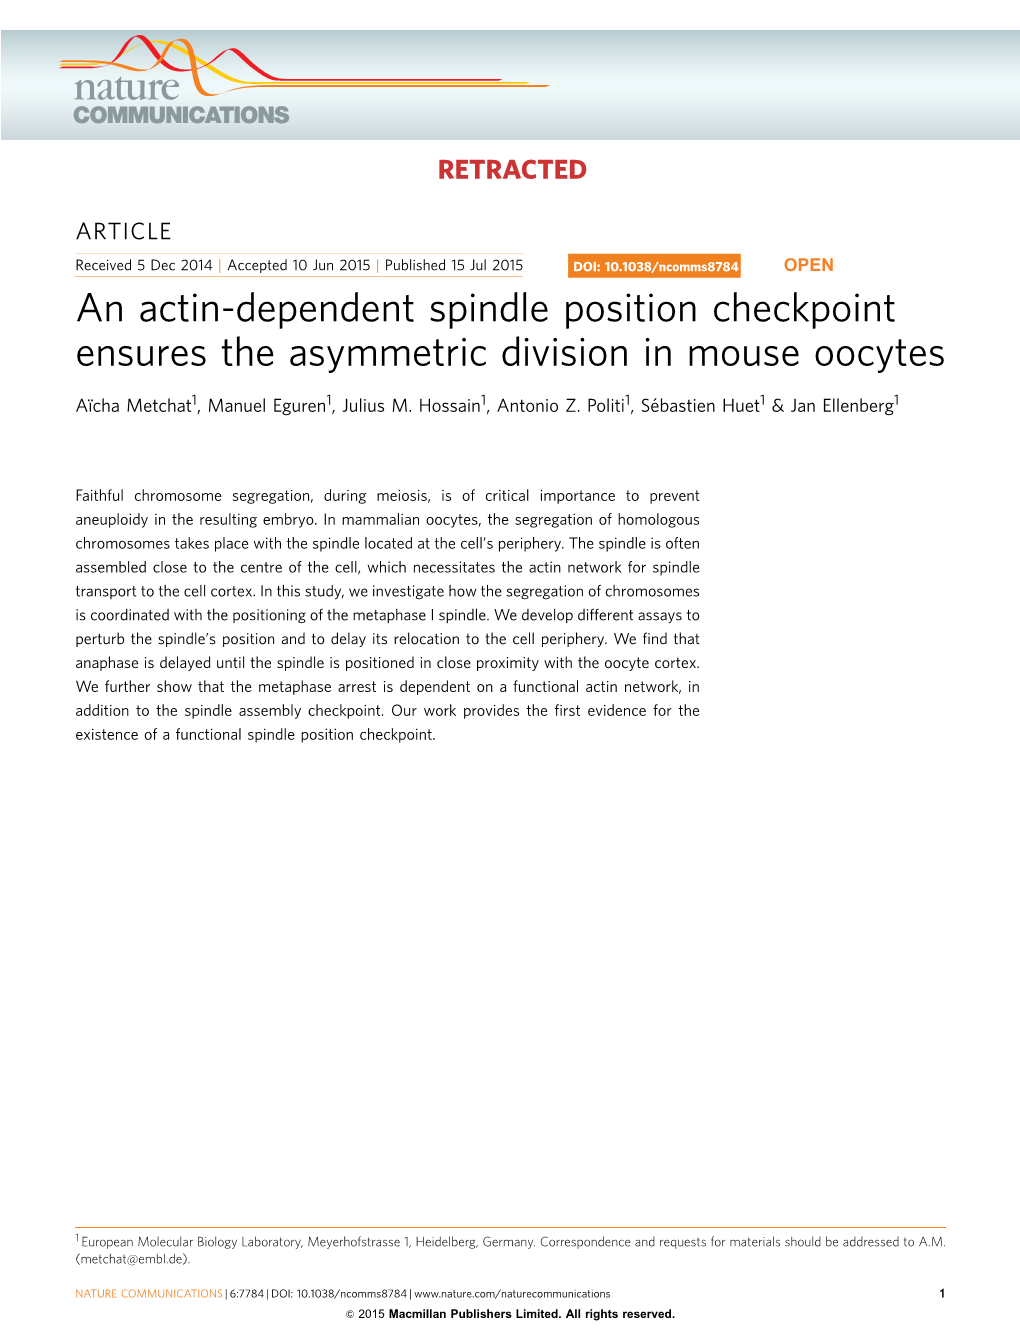 An Actin-Dependent Spindle Position Checkpoint Ensures the Asymmetric Division in Mouse Oocytes